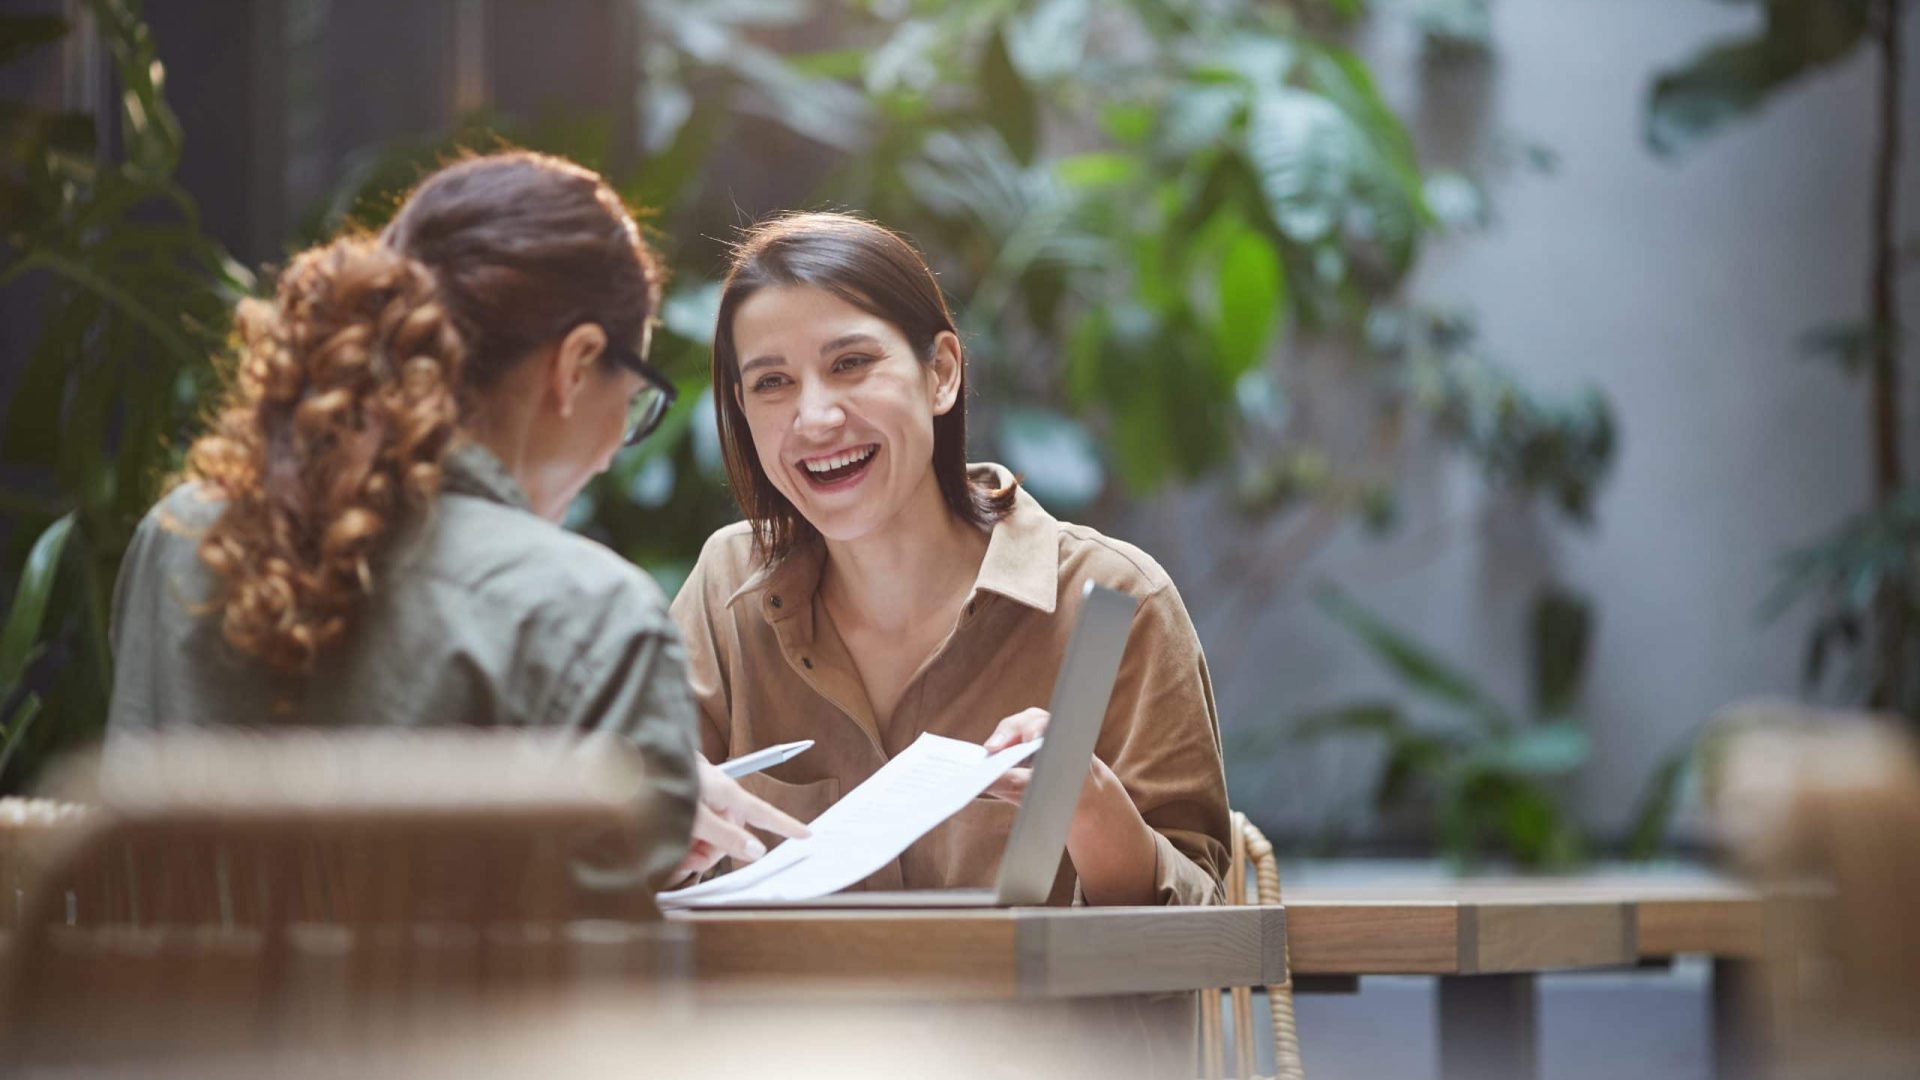 Portrait of cheerful young woman talking to friend or colleague during business meeting on outdoor cafe terrace, copy space